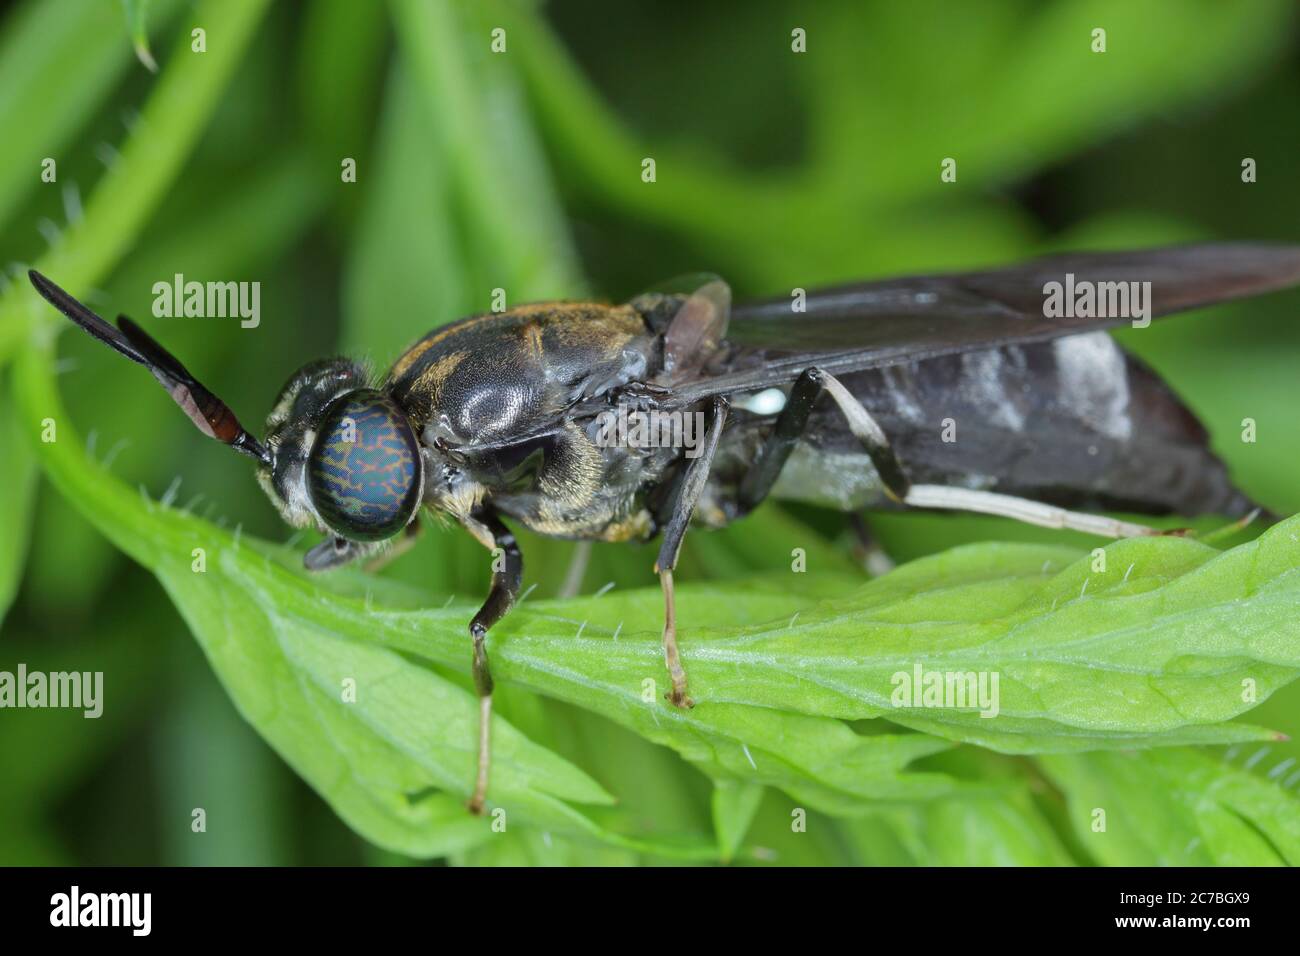 Black Soldier Fly - latin name is Hermetia illucens.  Close-up of fly sitting on a leaf. This species is used in the production of protein. Stock Photo